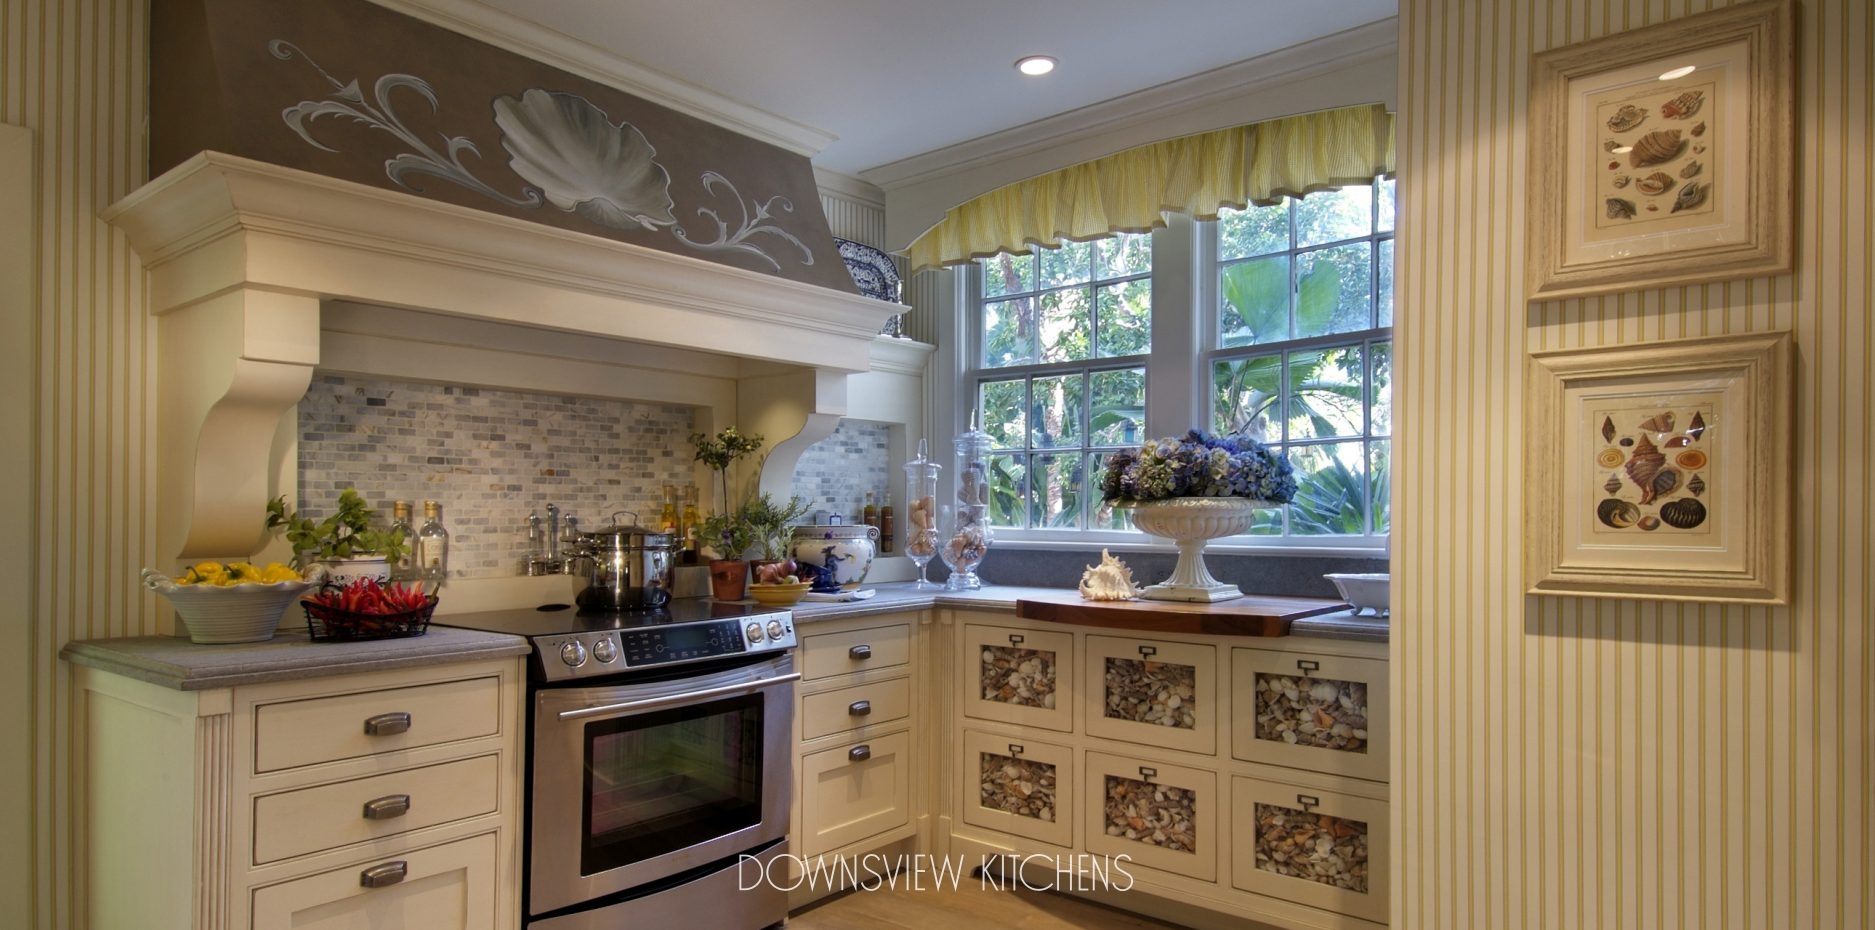 Palm Beach Cottage Downsview Kitchens And Fine Custom Cabinetry